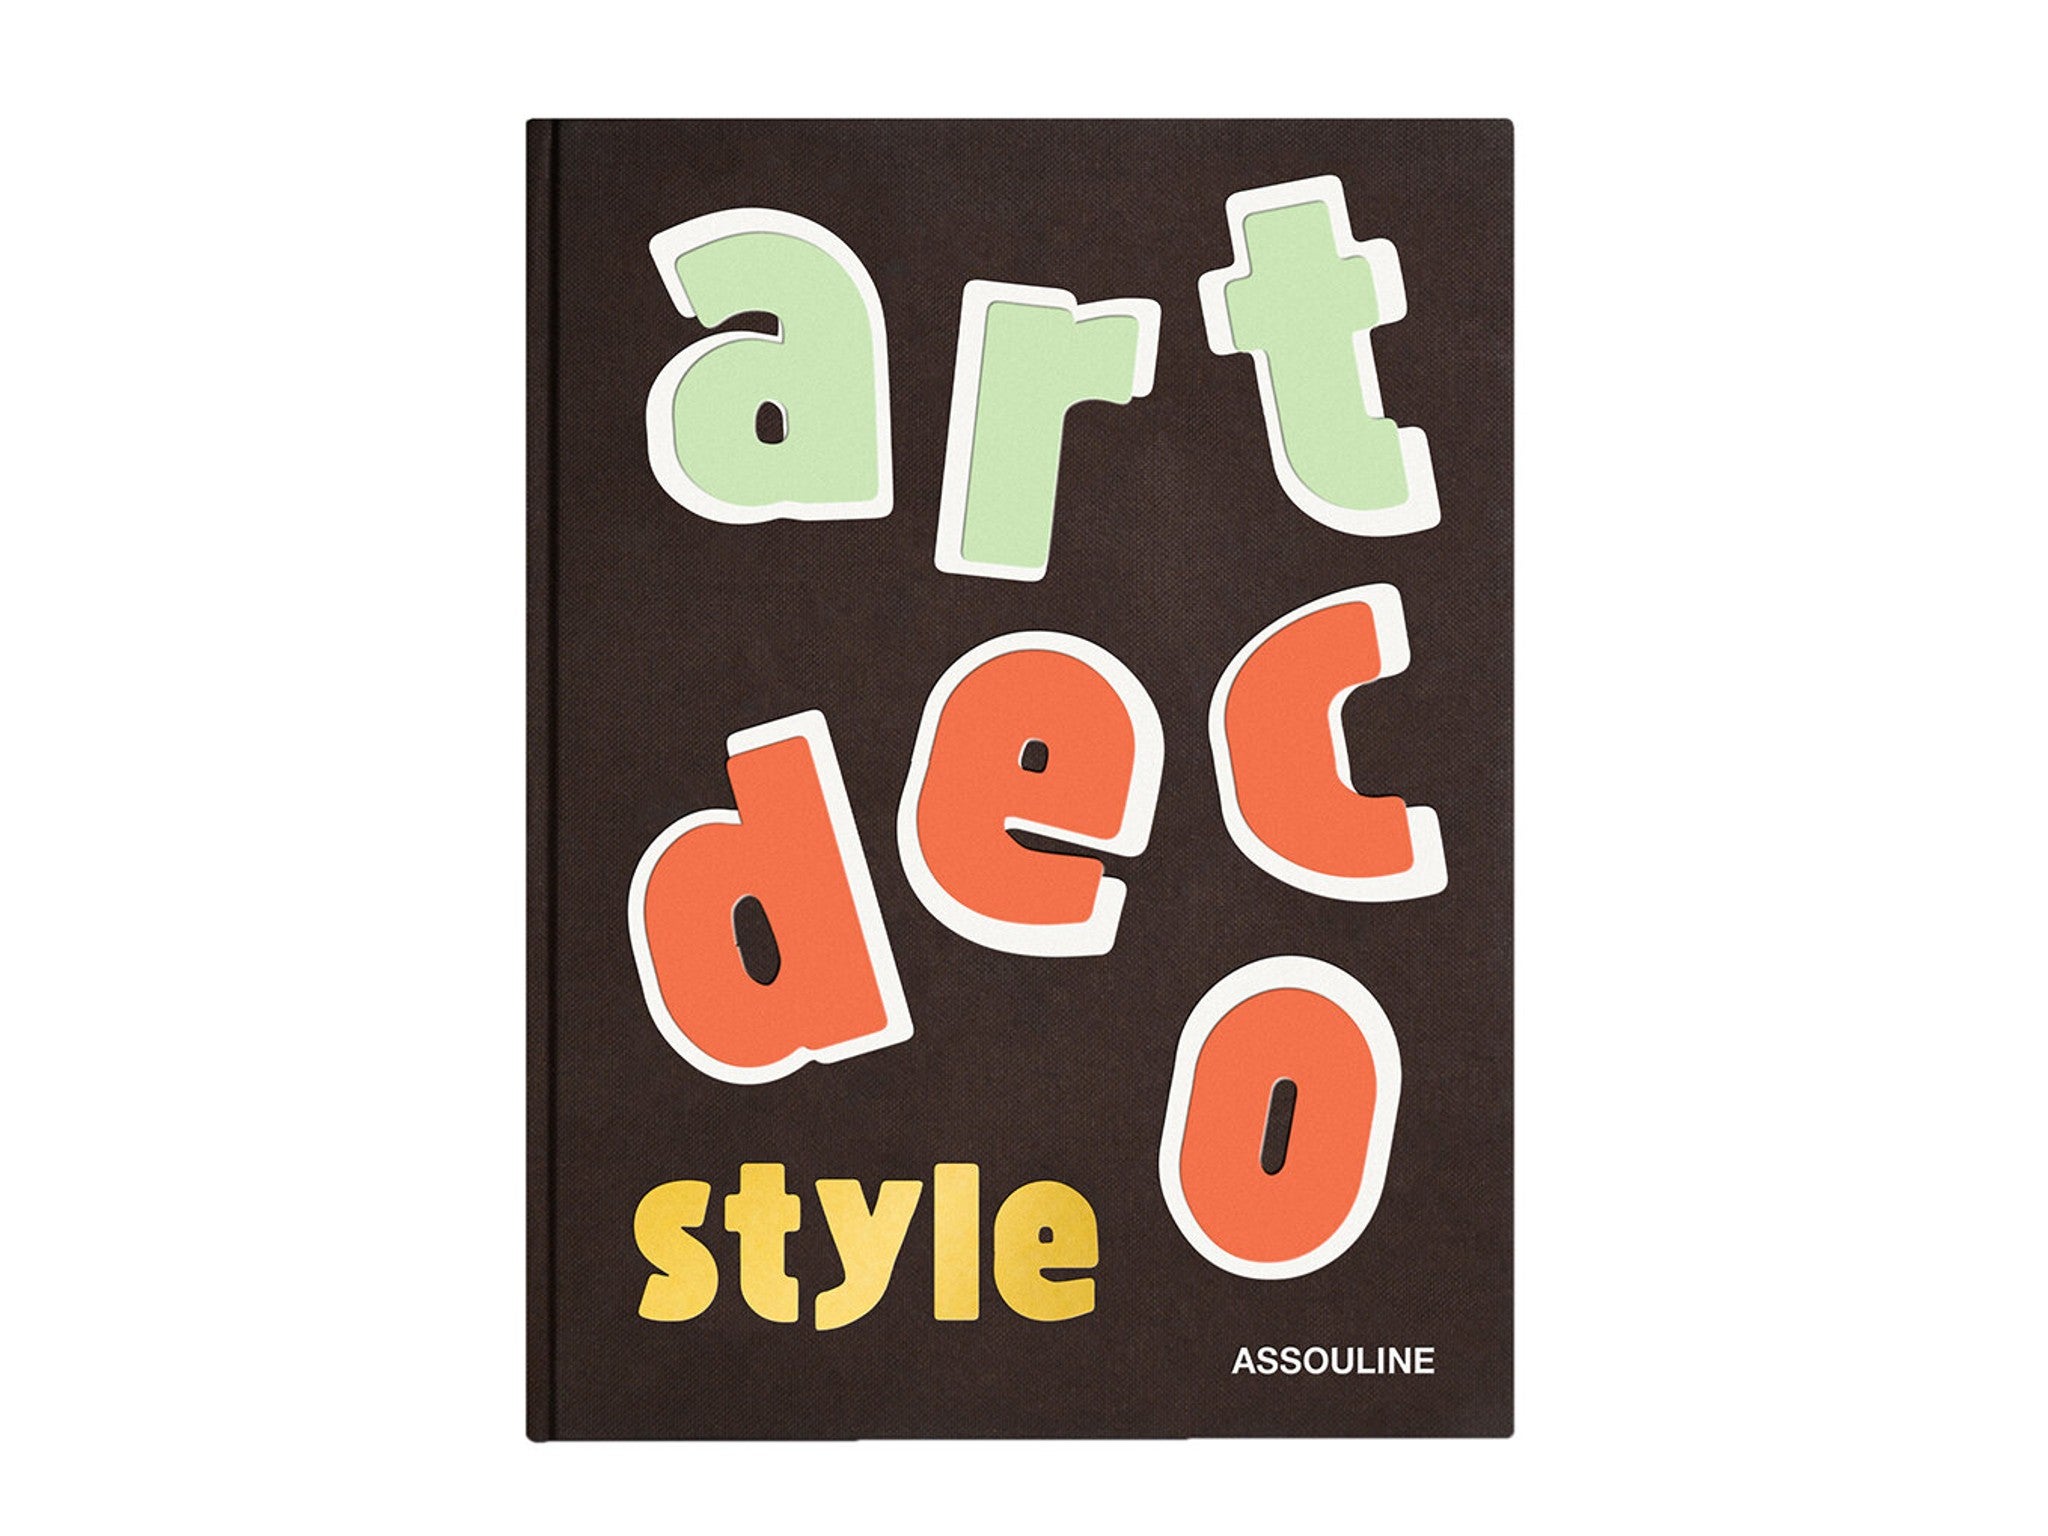 ‘Art Deco Style’ by Jared Goss, published by Assouline indybest.jpg